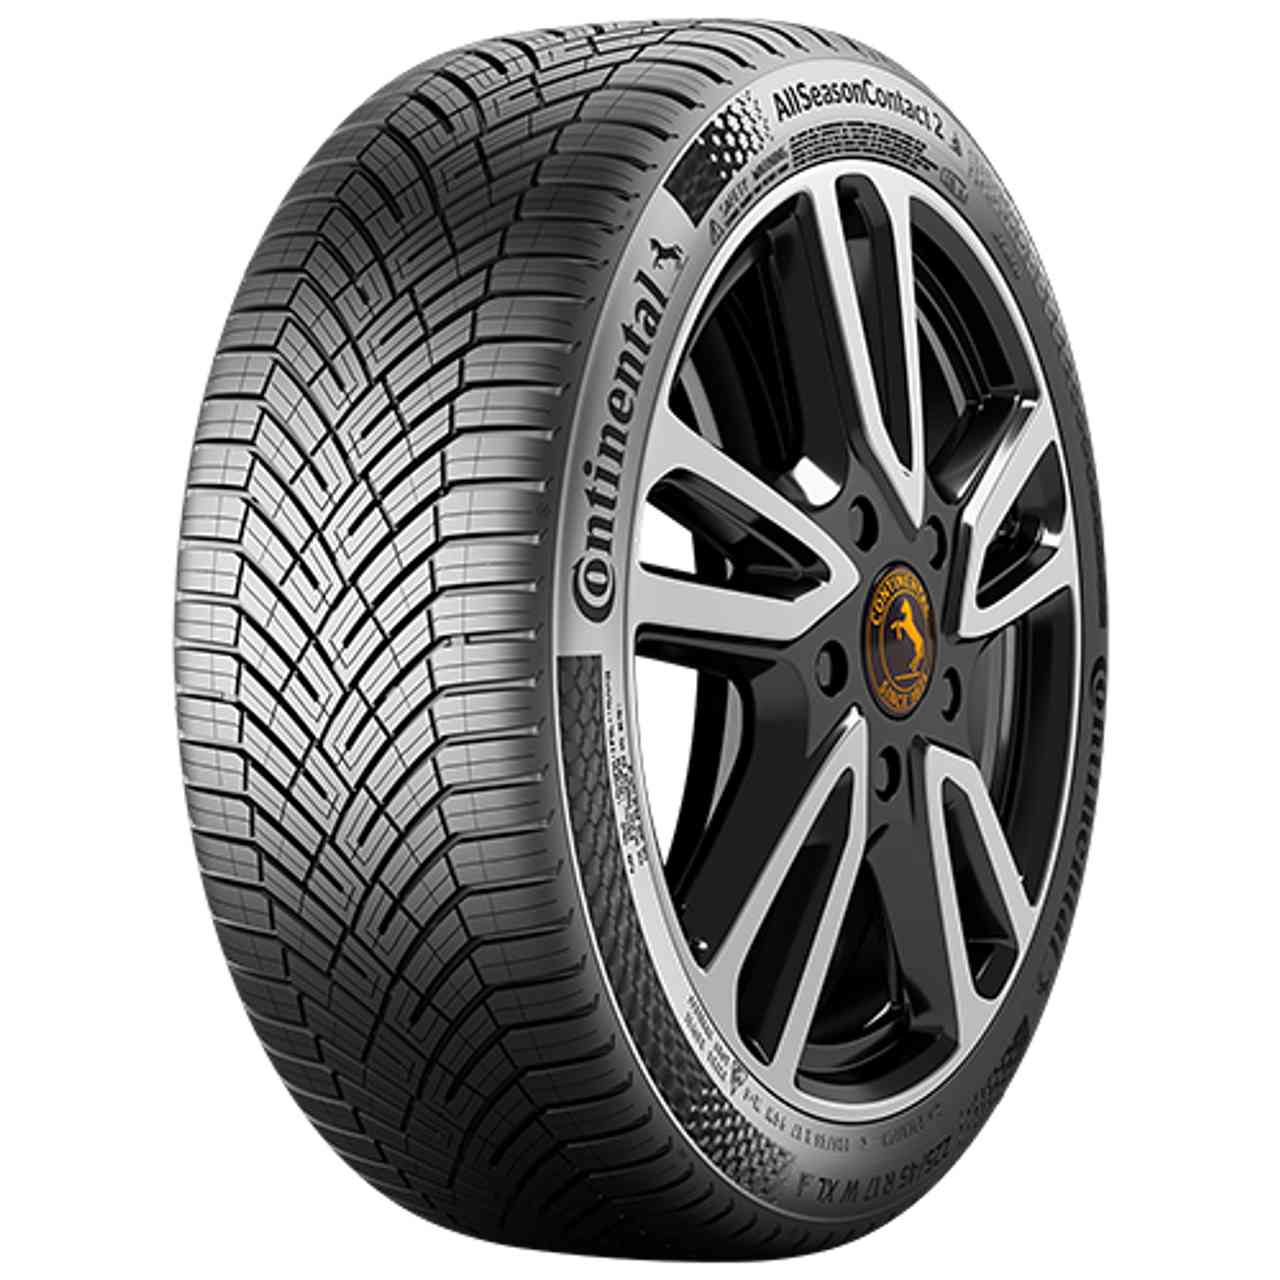 CONTINENTAL ALLSEASONCONTACT 2 (EVc) 195/60R16 89H BSW